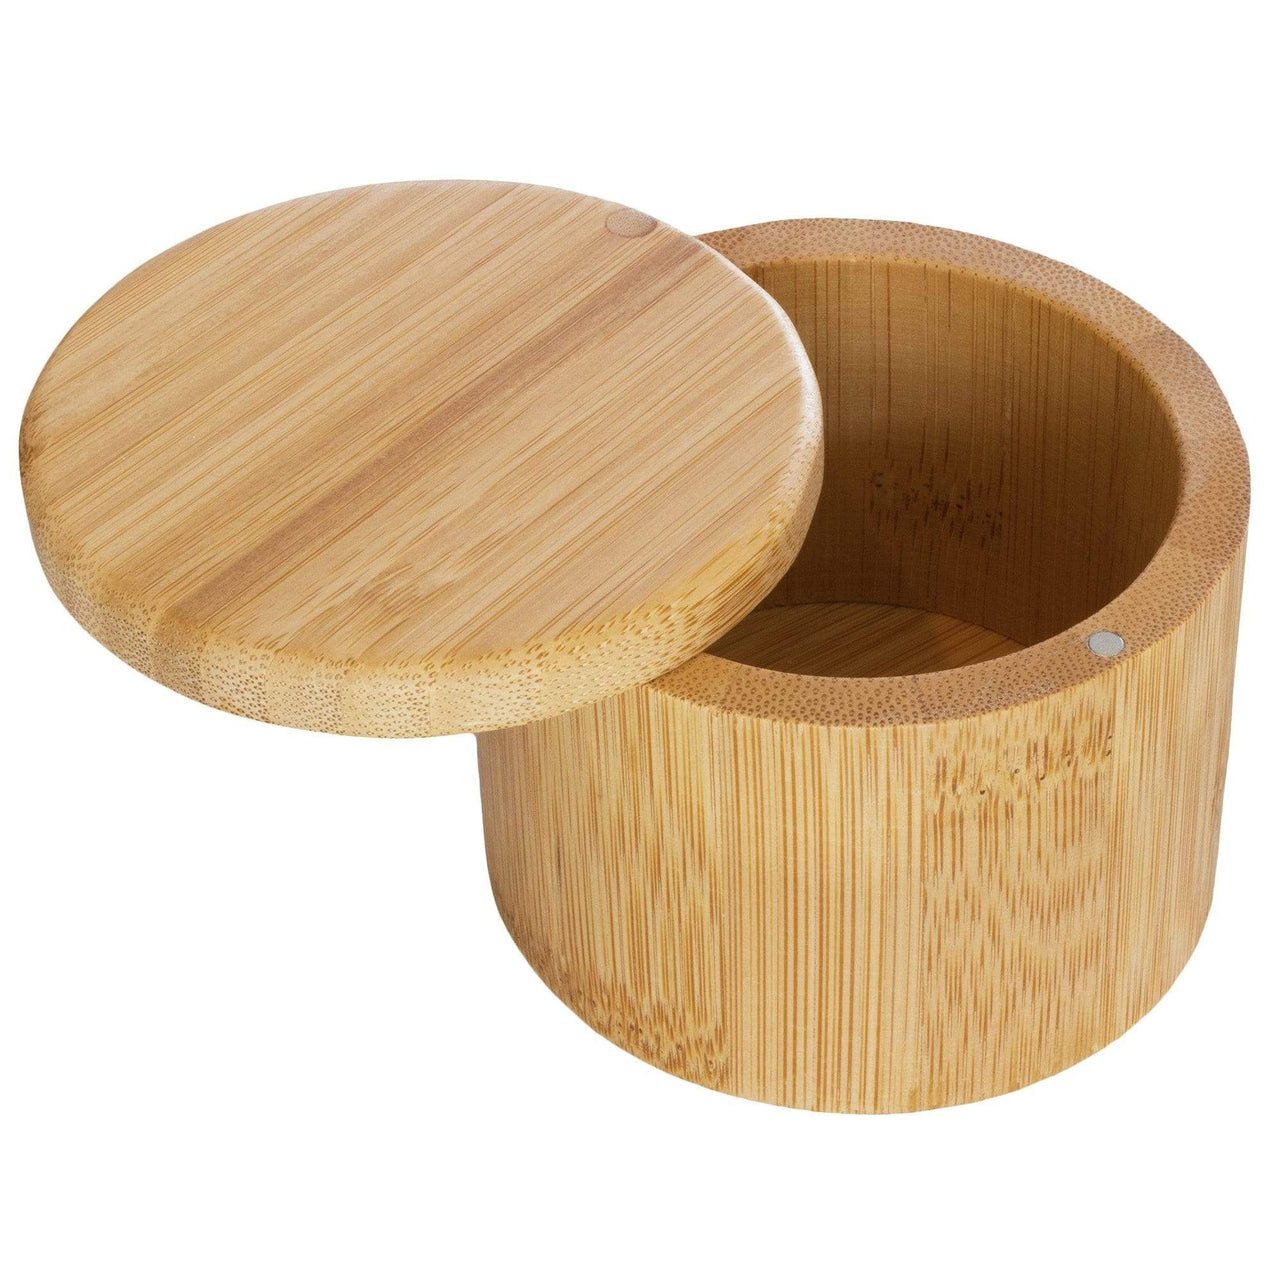 Totally Bamboo Accessory Totally Bamboo SC Stamped Salt & Storage Box